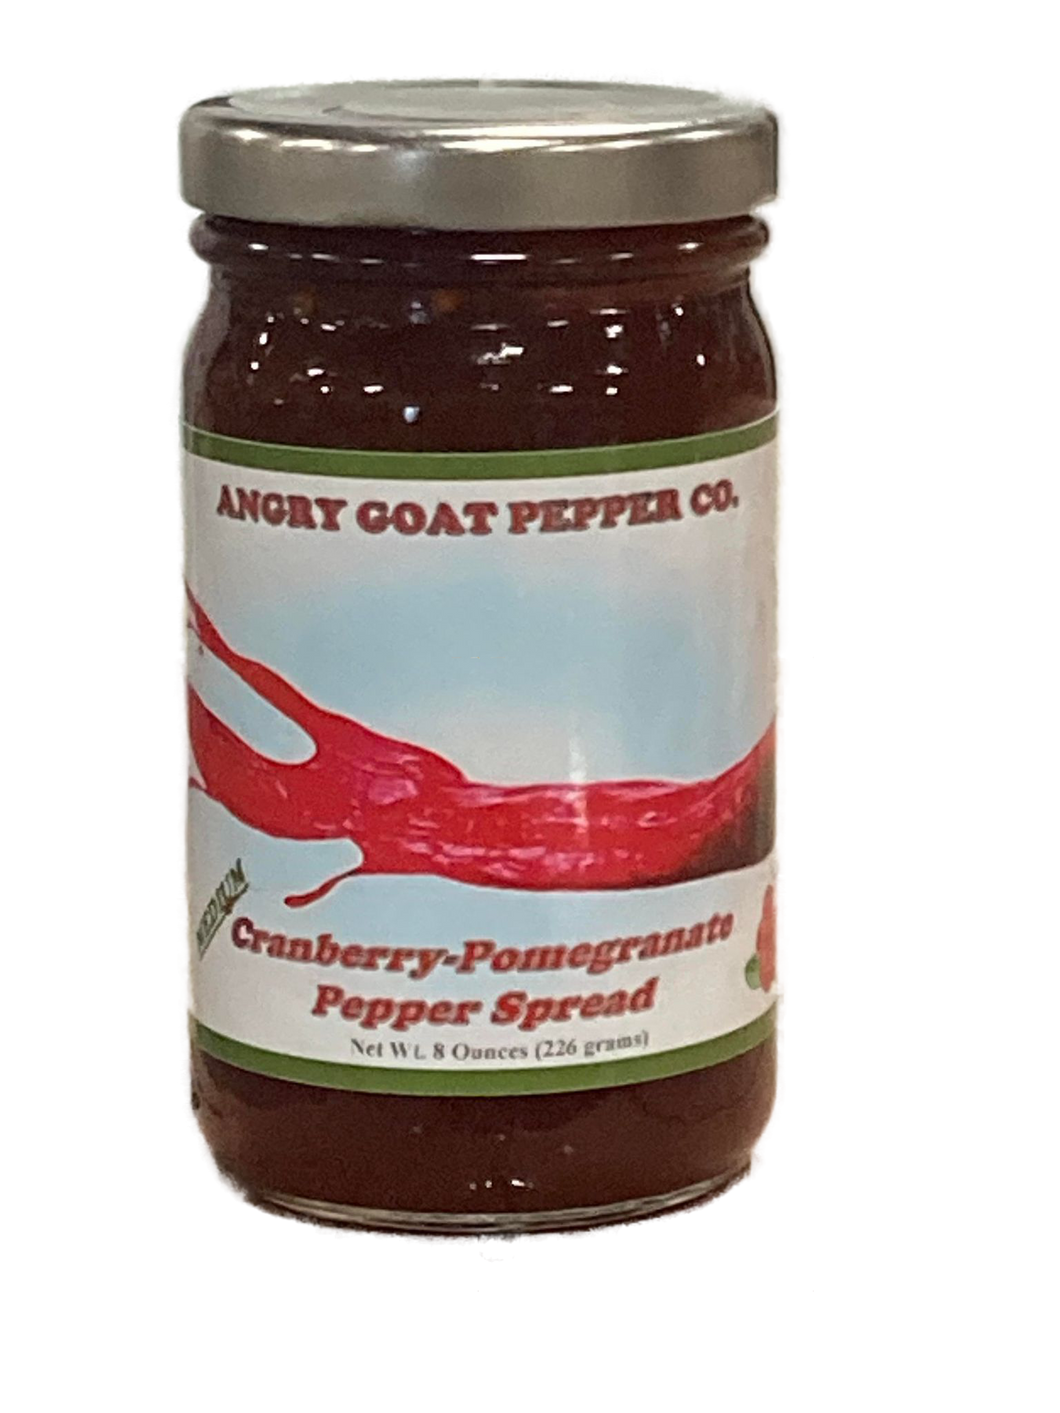 AGPC - Cranberry-Pomegranate Pepper Jam - BEING DISCONTINUED